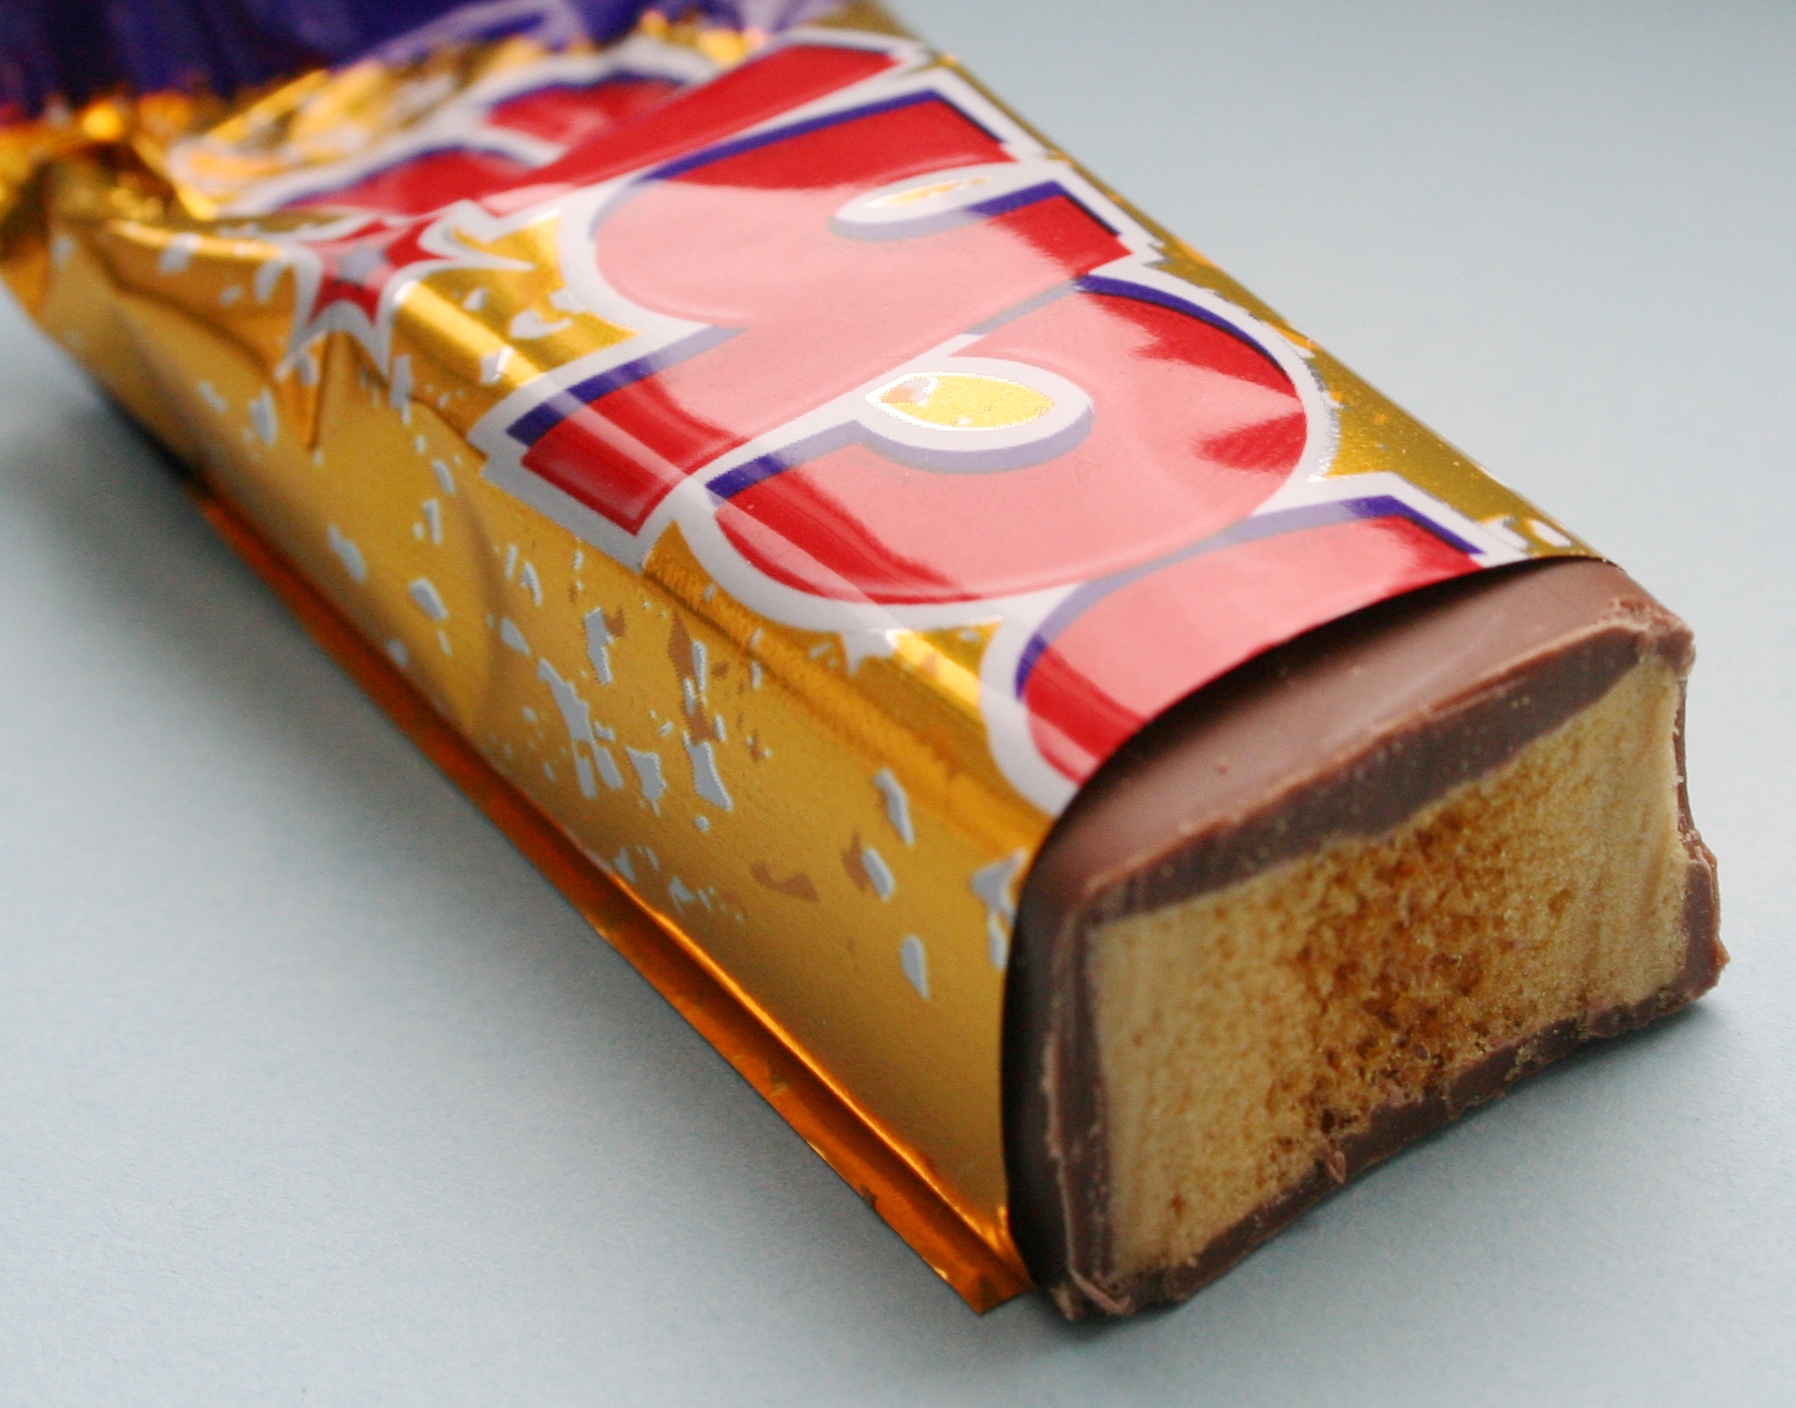 Picture of a chocolate bar from the UK, which is called "Crunchie".